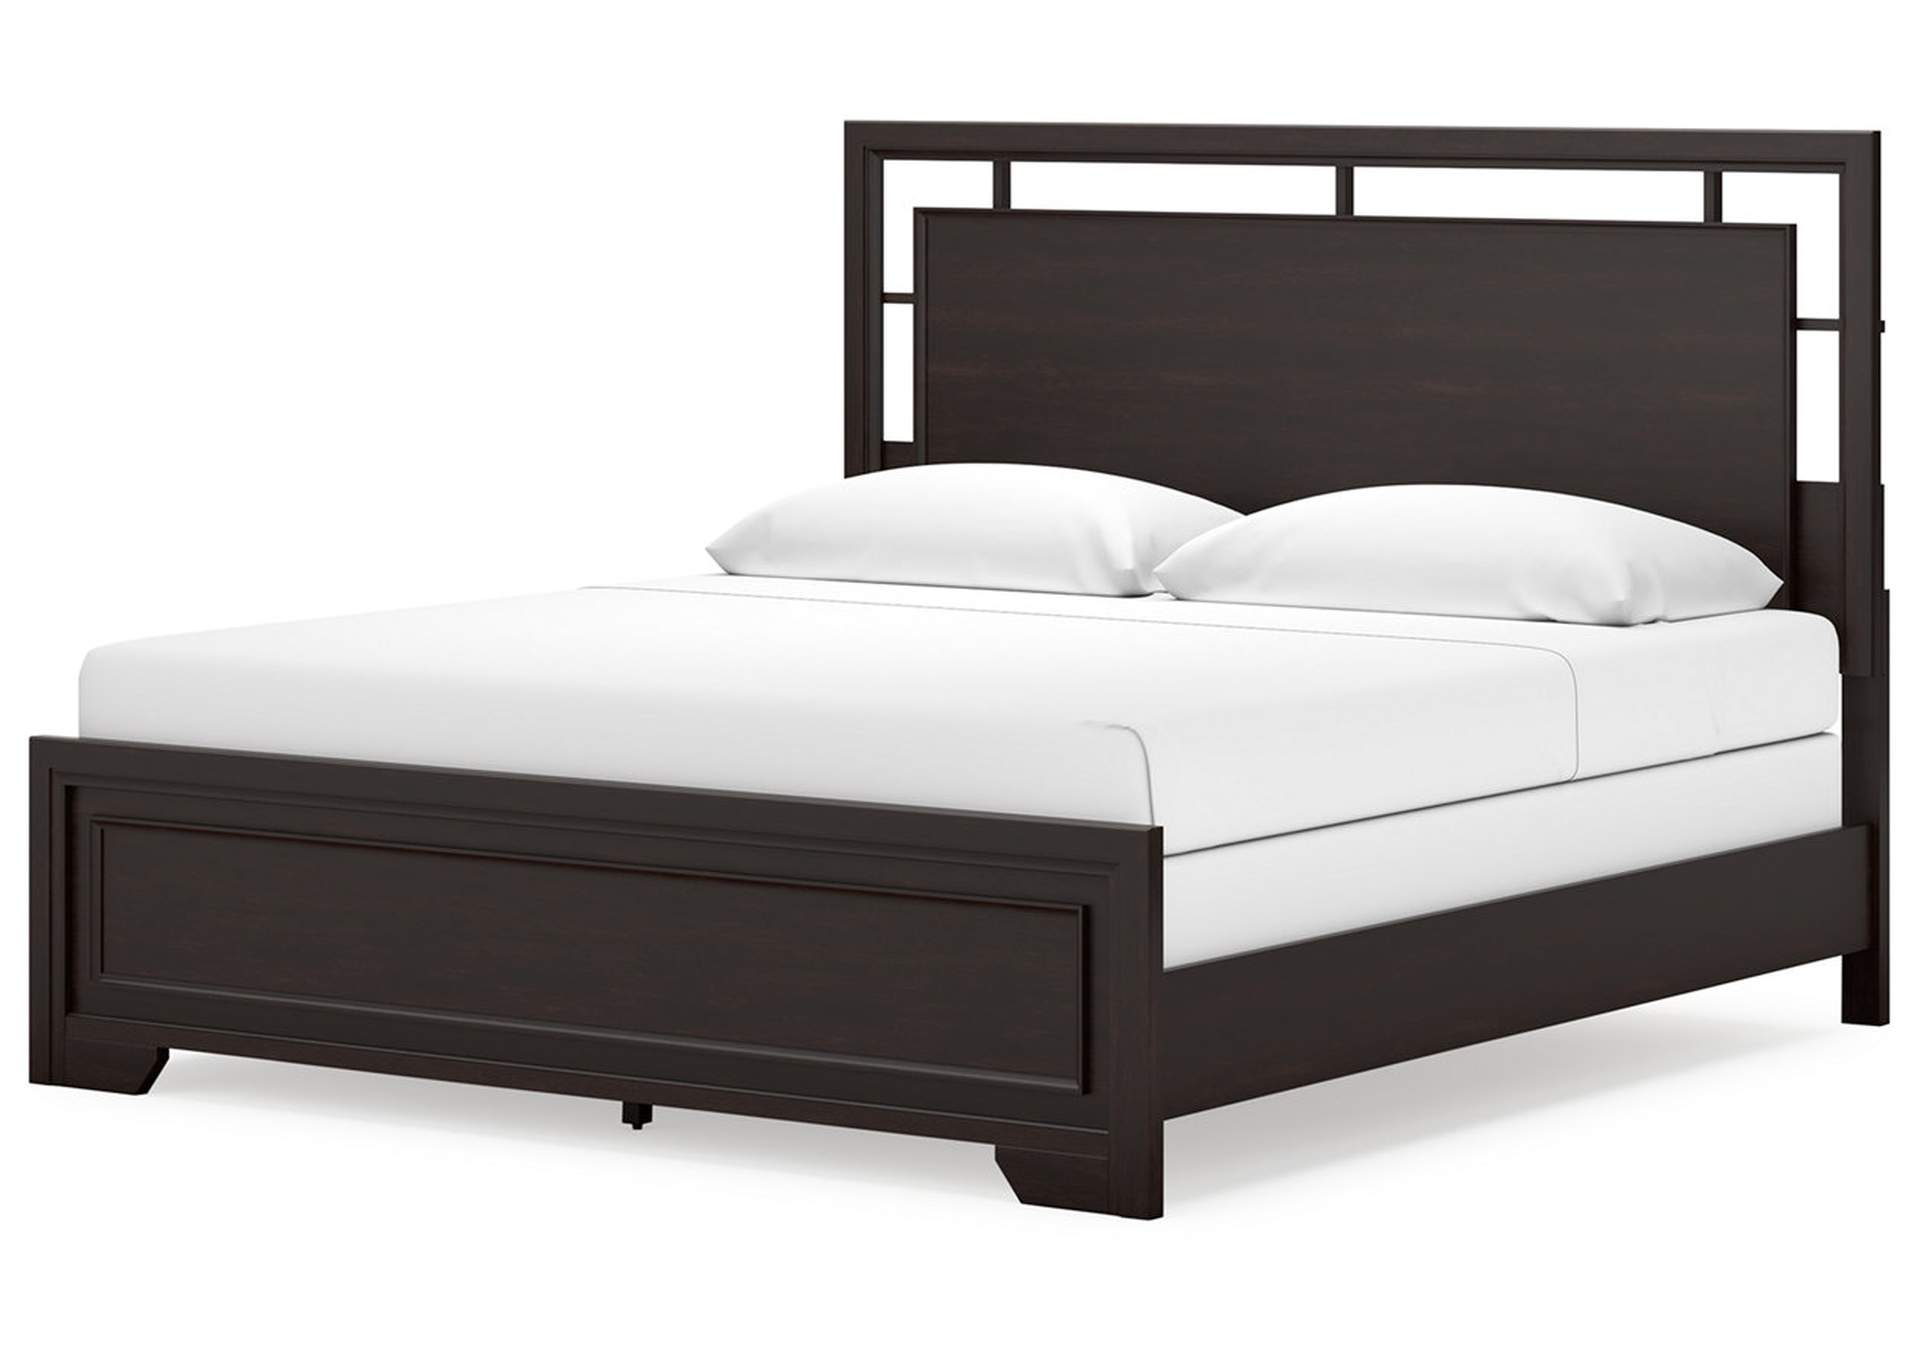 Covetown King Panel Bed,Signature Design By Ashley